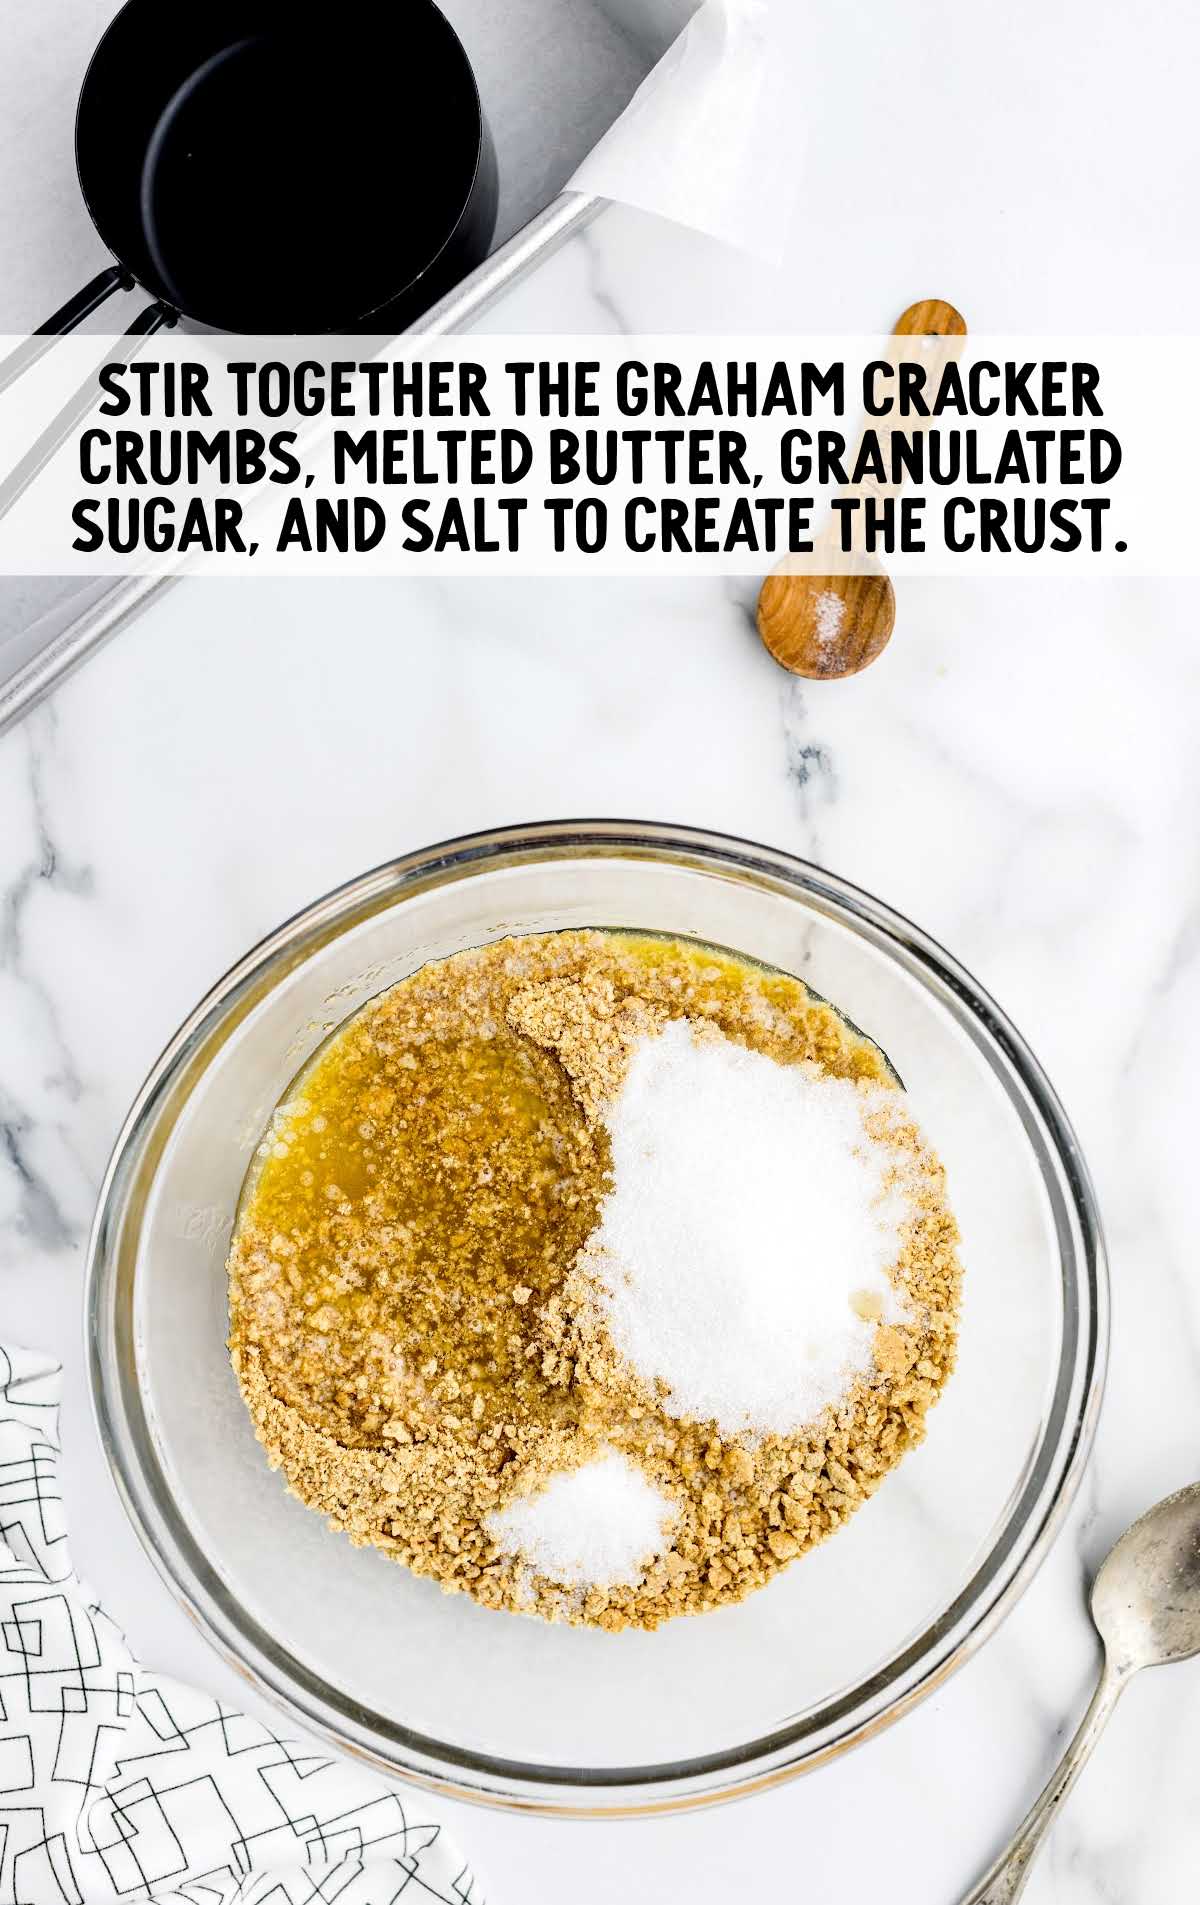 graham cracker crumbs, melted butter, sugar, and salt stirred in a bowl